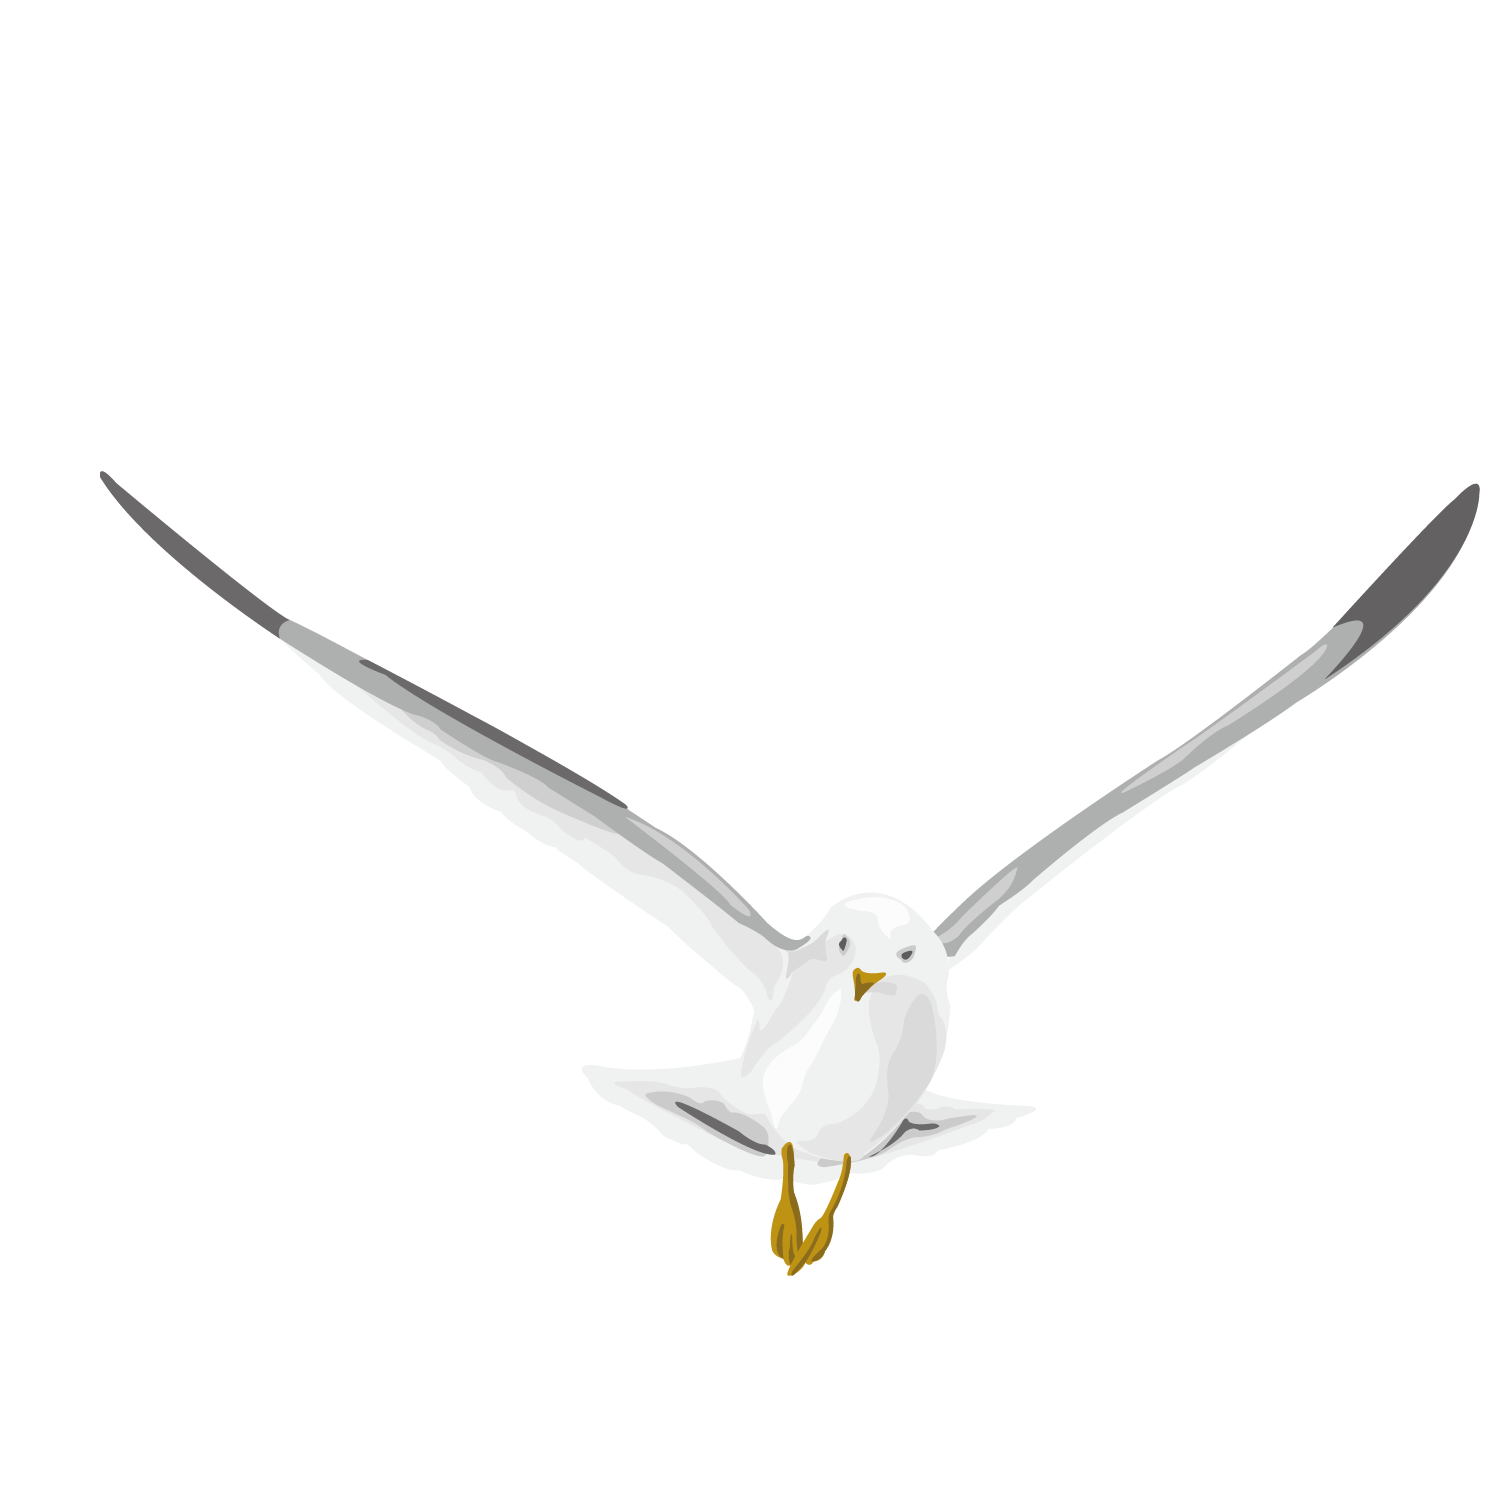 White Pigeon PNG HD Images